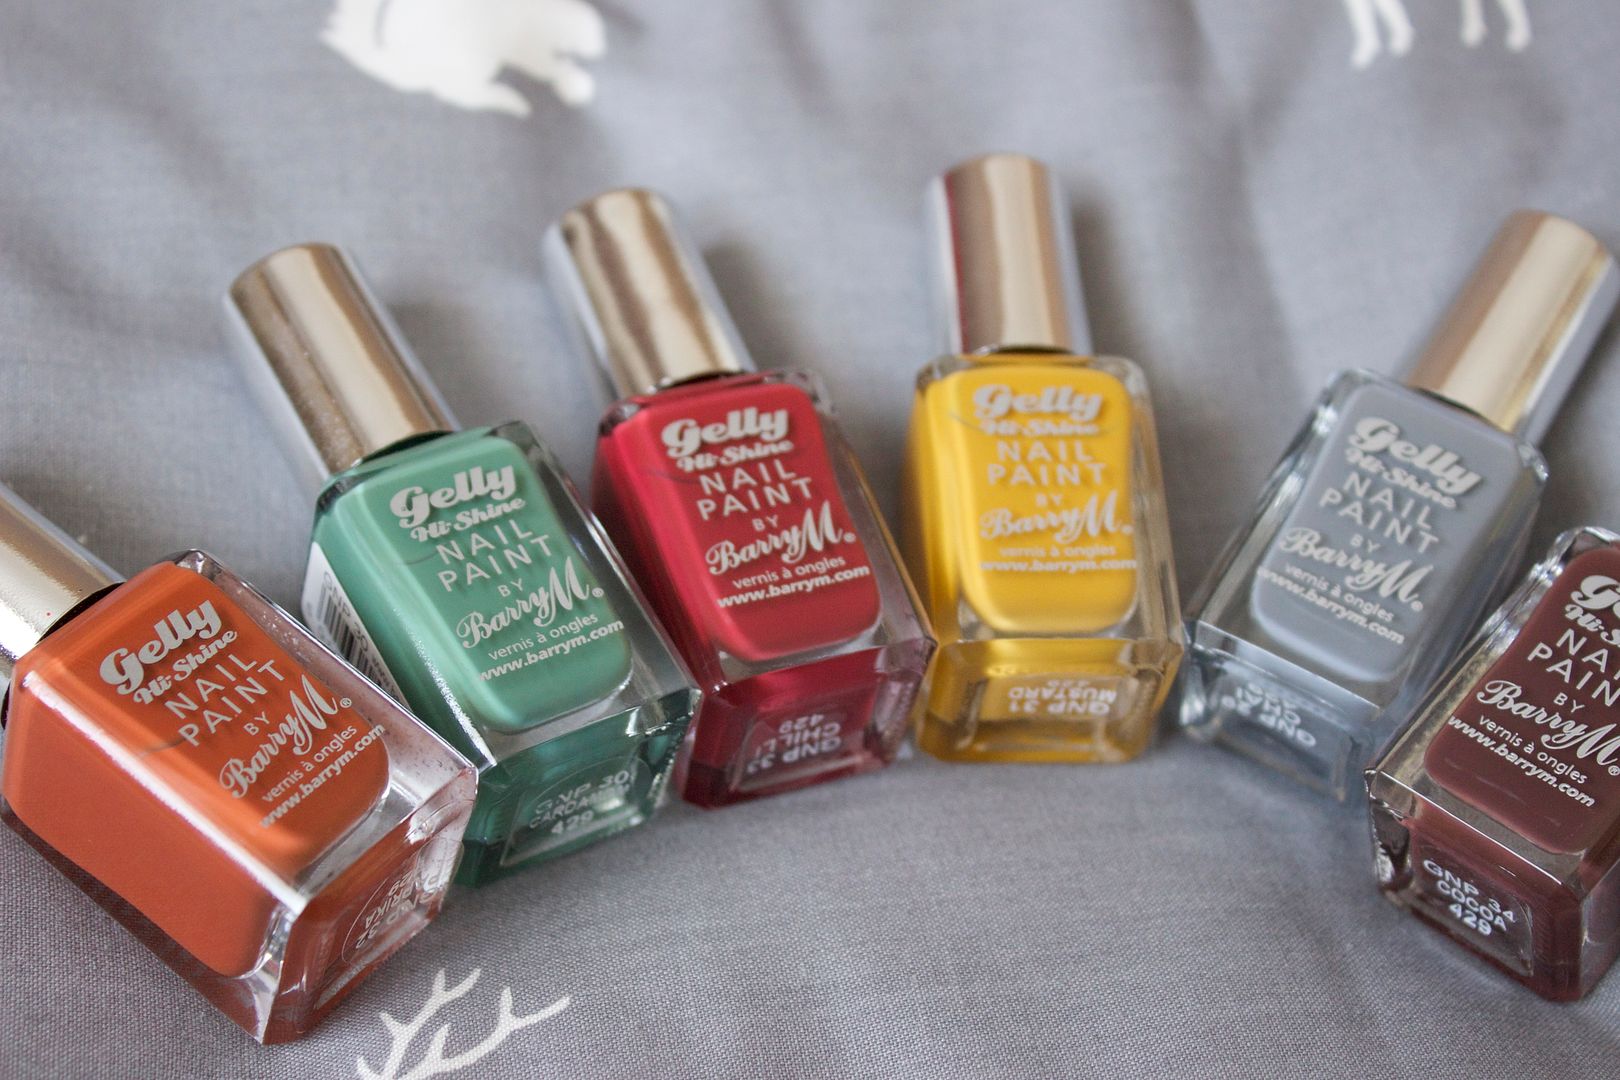 Barry M Autumn/Winter 2014 Gelly Nail Paints